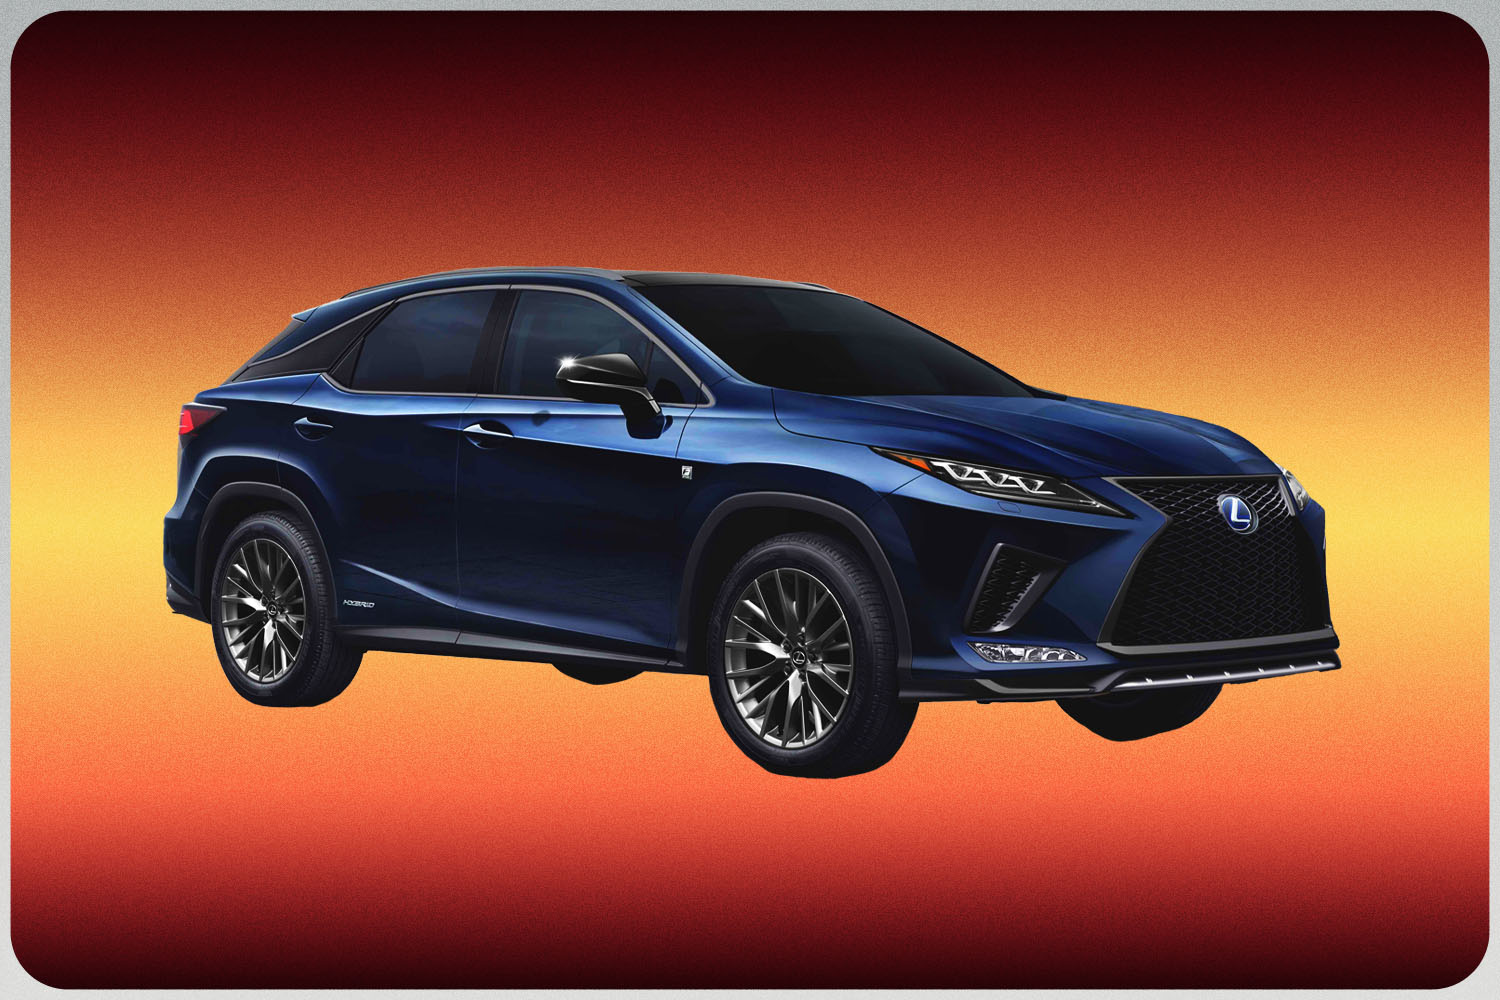 Our Pick for the Best Hybrid Luxury SUV: 2022 Lexus RX 450h in Blue